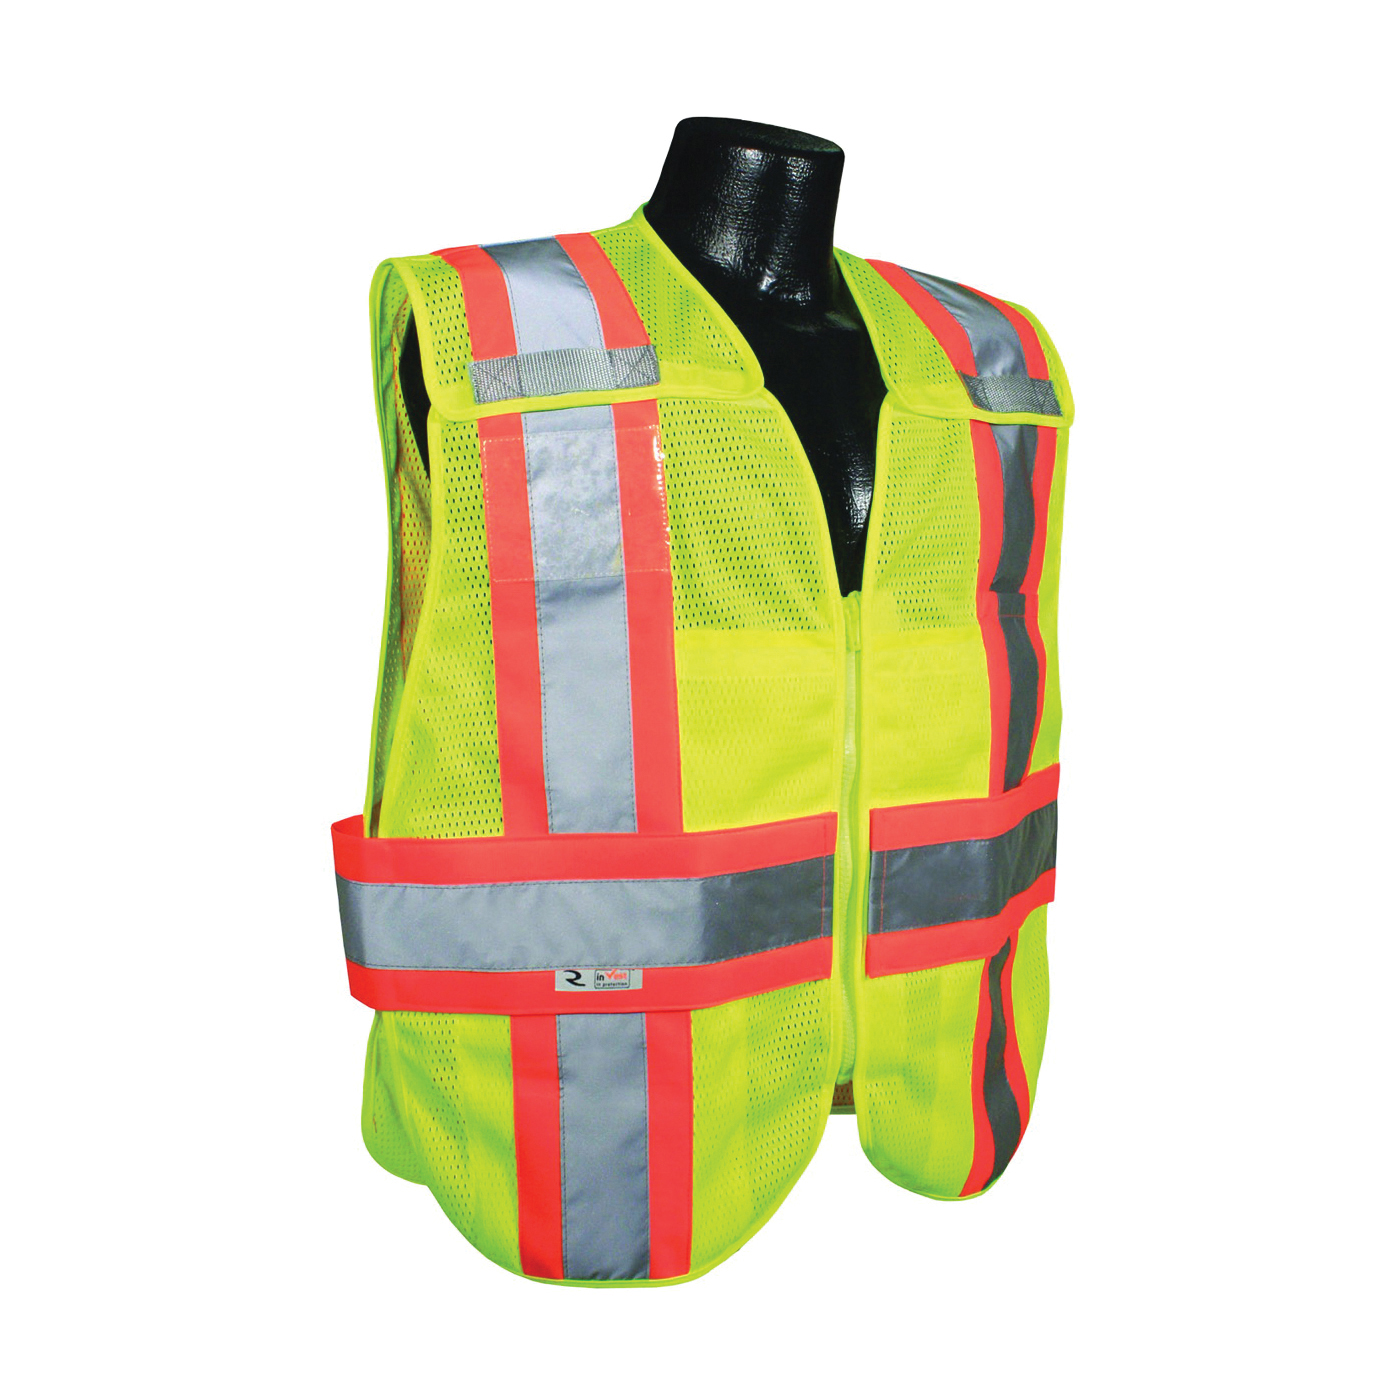 SV24-2ZGM-XL/2XL Expandable Safety Vest, XL/2XL, Polyester, Green/Silver, Zip-N-Rip Closure